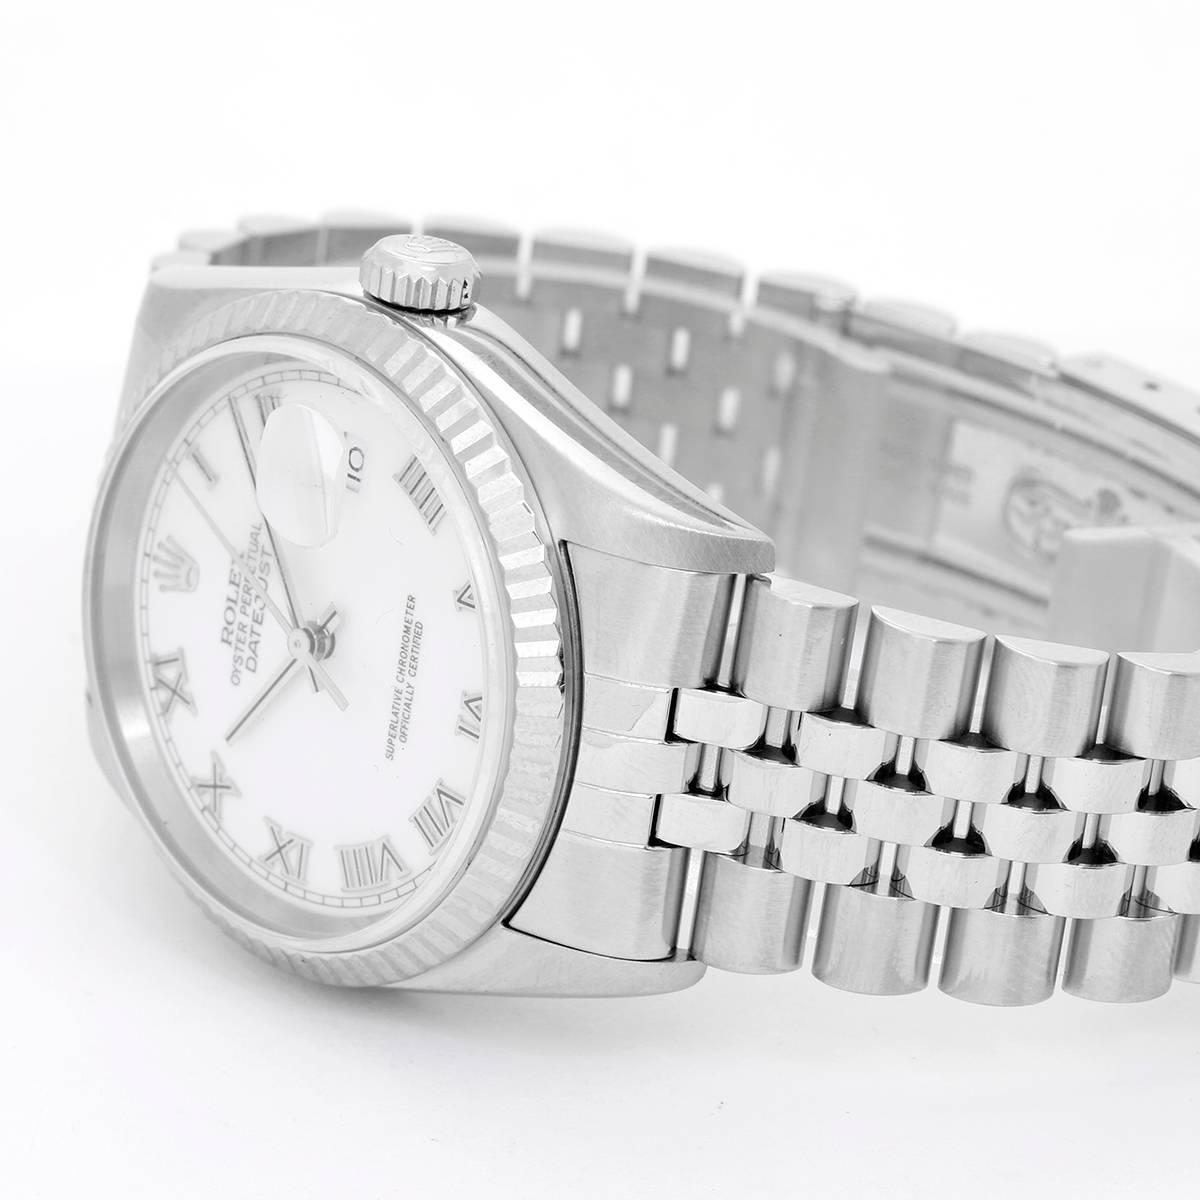 Rolex Datejust Men's Stainless Steel Watch 16234 -  Automatic winding, 31 jewels, Quickset, sapphire crystal. Stainless steel case with 18k white gold fluted bezel  (36mm diameter). Rhodium silvered dial with raised Roman numerals. Stainless steel